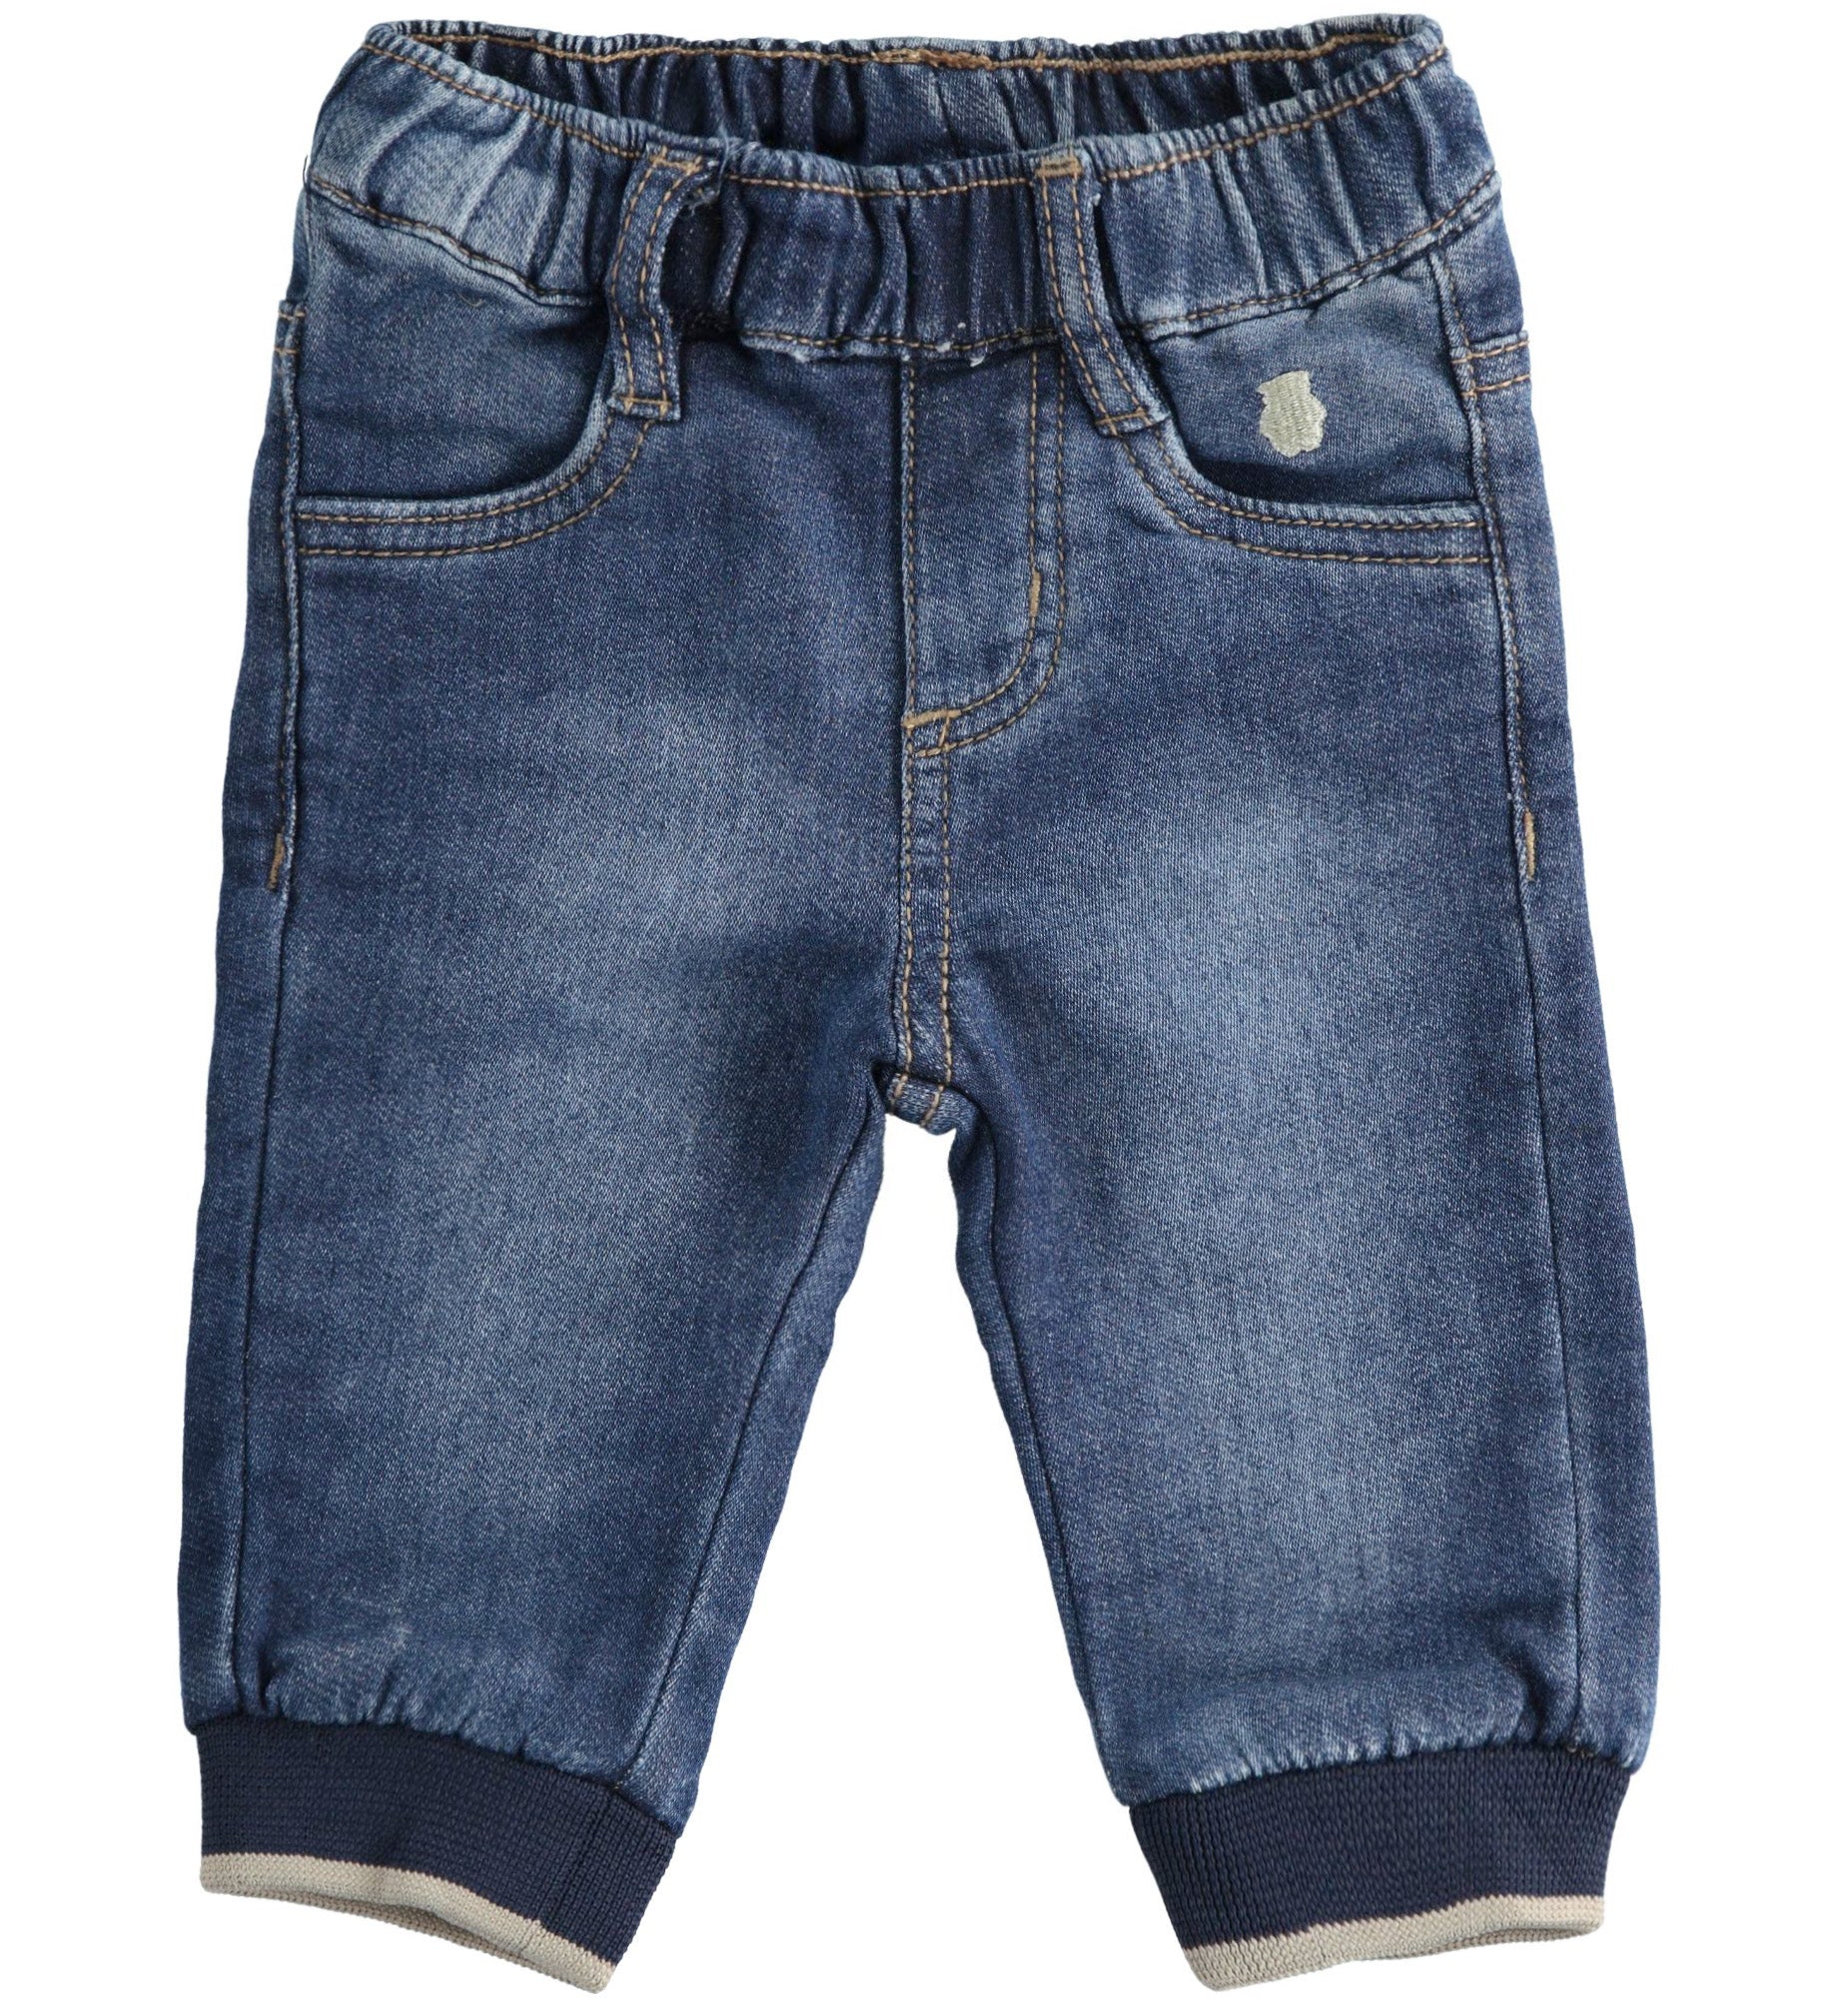 Pure Baby jeans by minibanda - supersoft denim trousers for baby